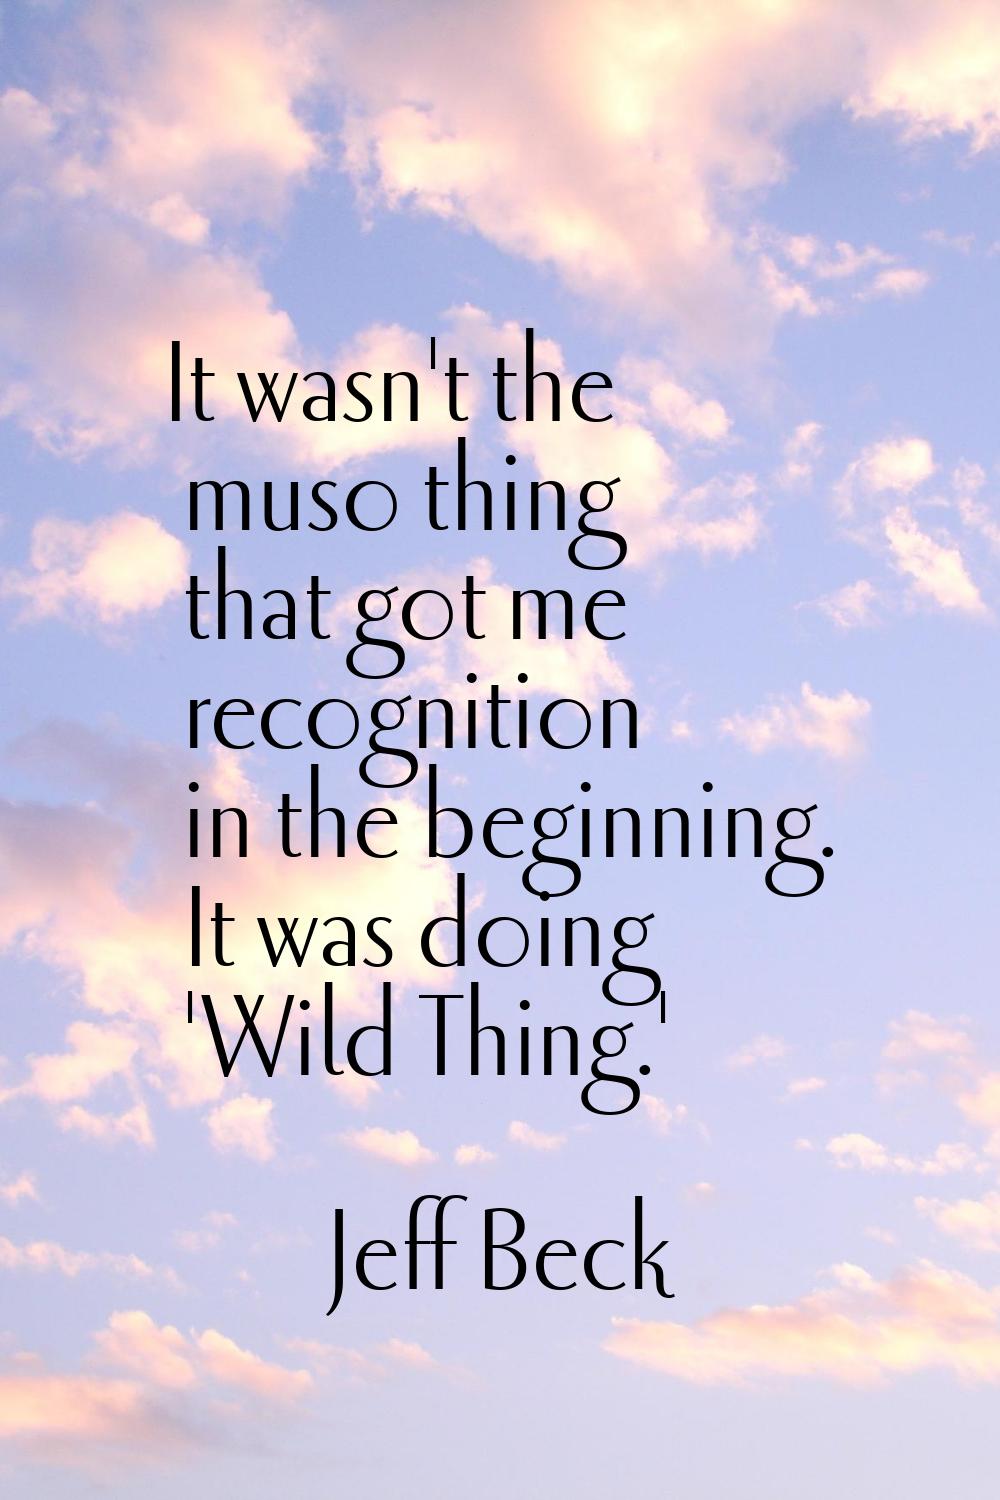 It wasn't the muso thing that got me recognition in the beginning. It was doing 'Wild Thing.'